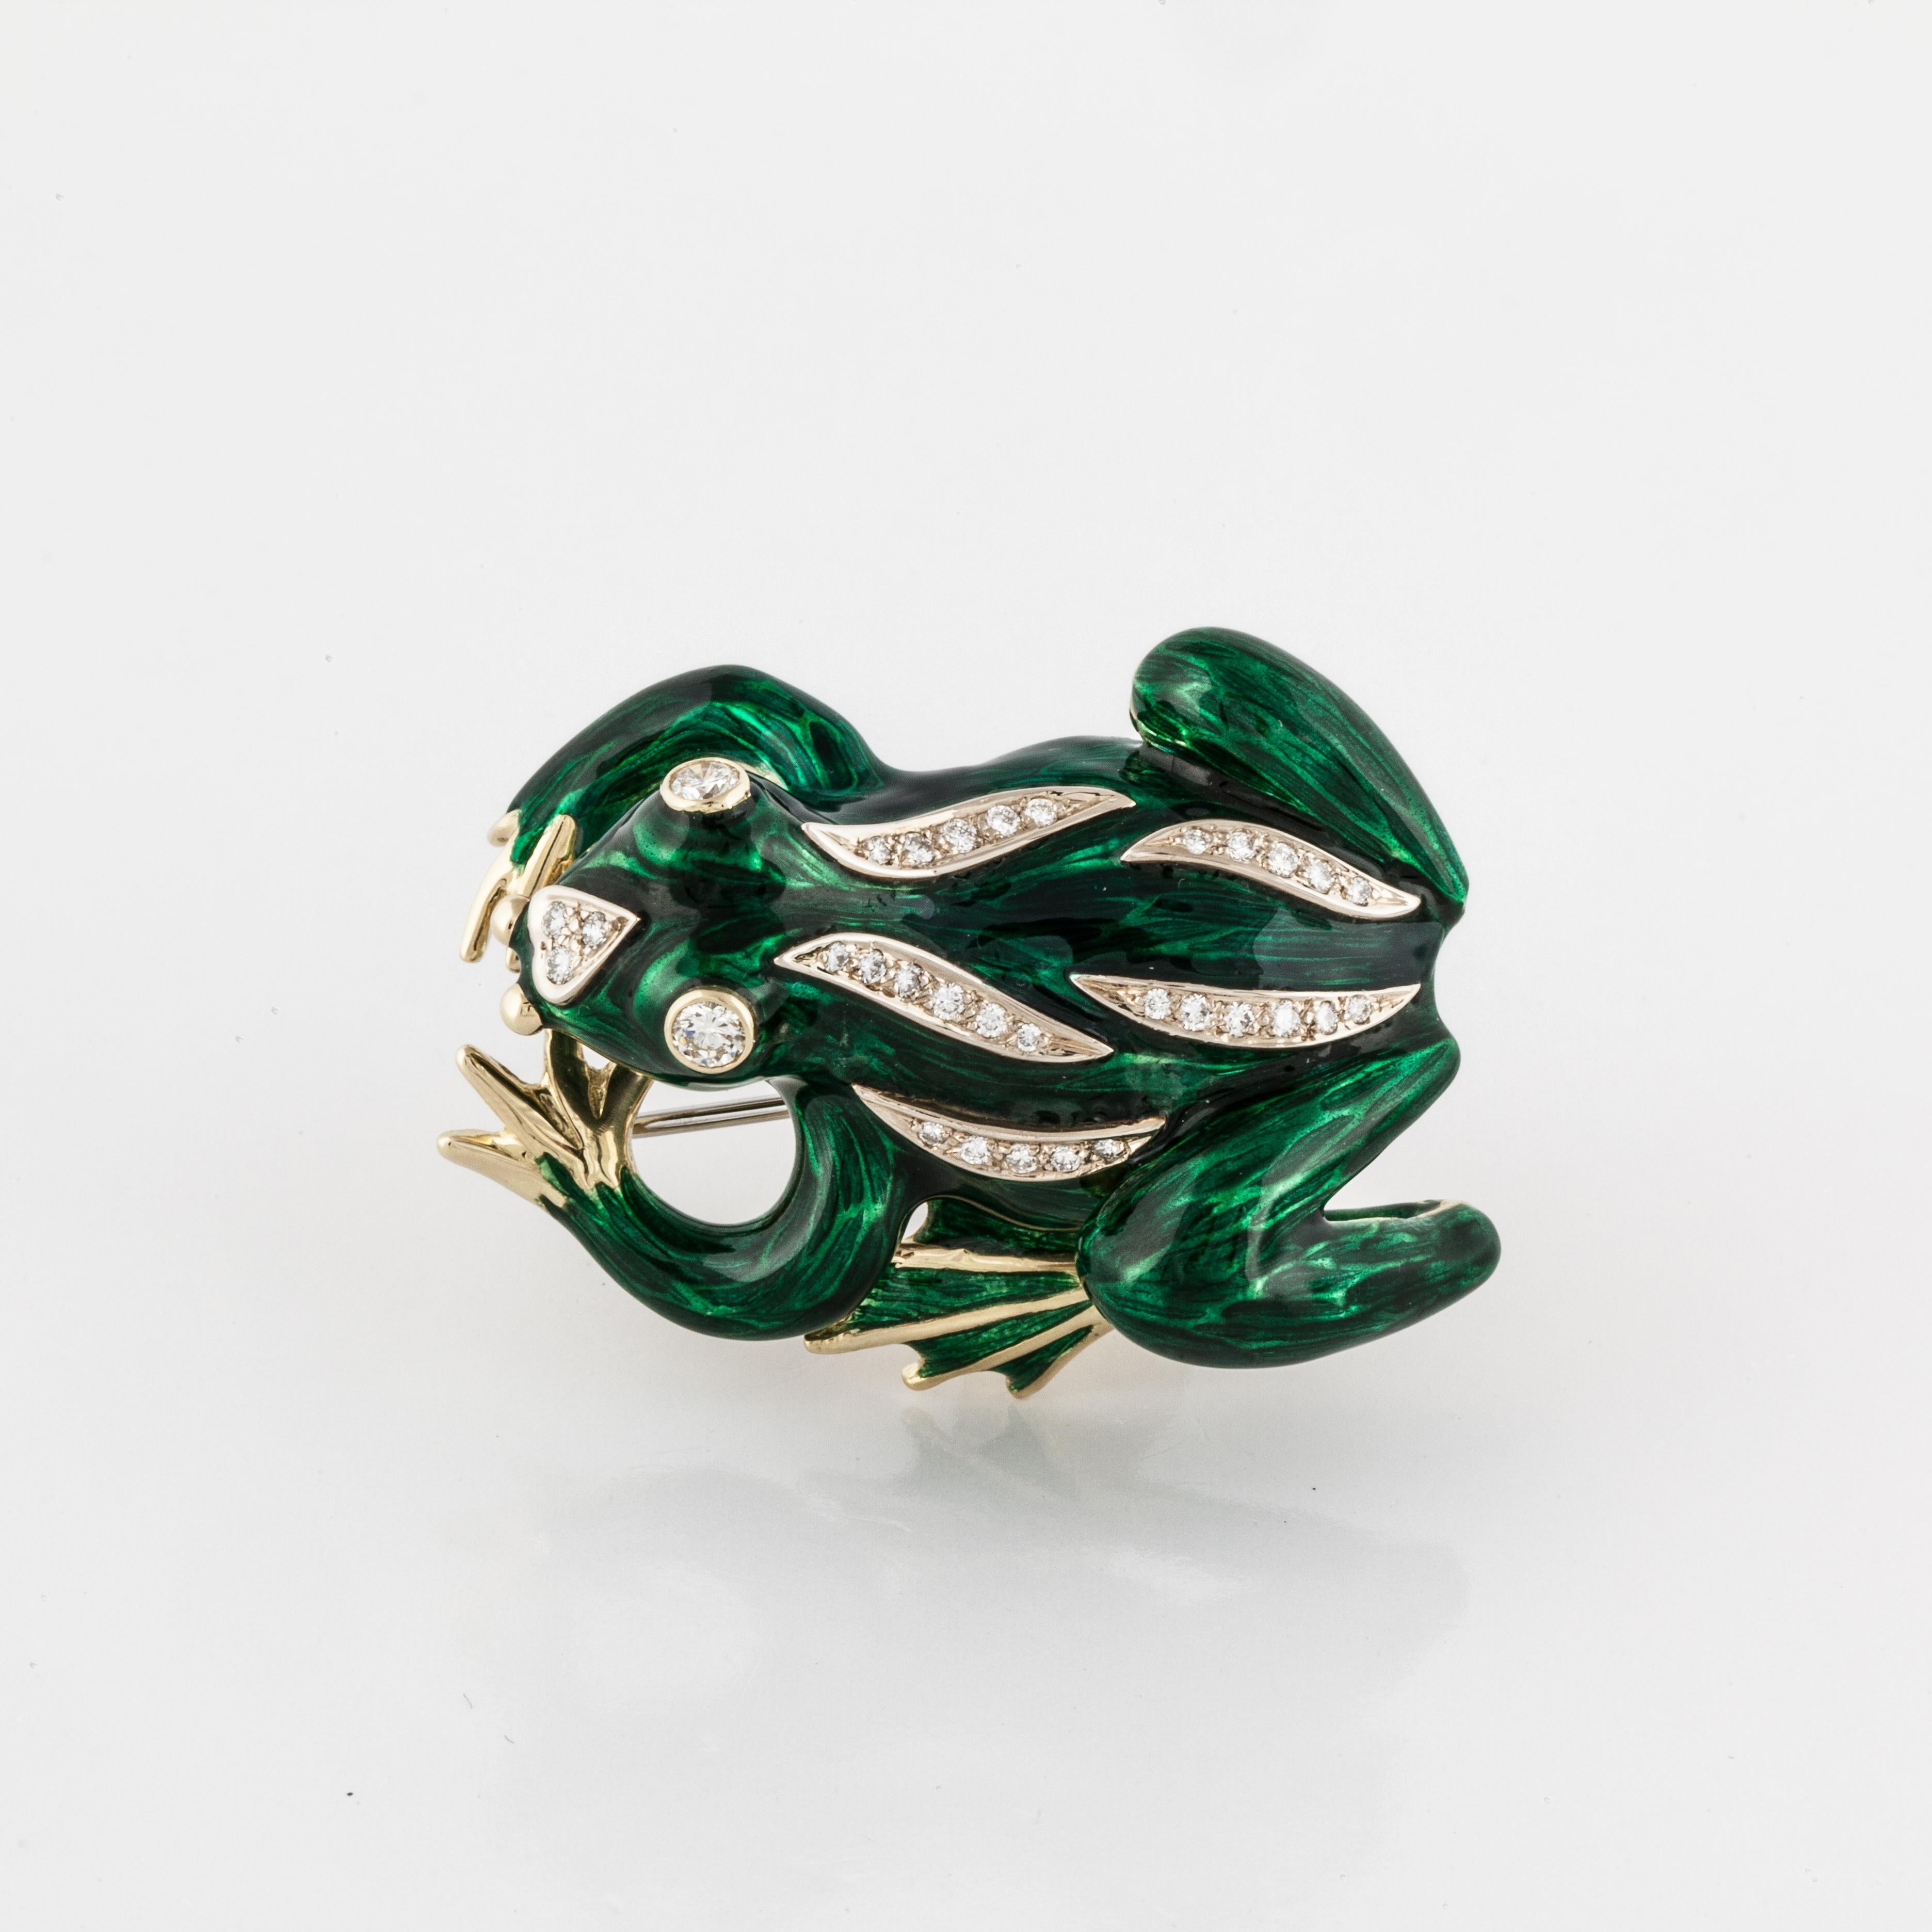 18K yellow gold green enamel frog brooch by Hammerman Bros.  There are thirty-two (32) round diamond accents totaling 0.95 carats; they are G-H in color and VVS2-VS1 in clarity.  Measures 2